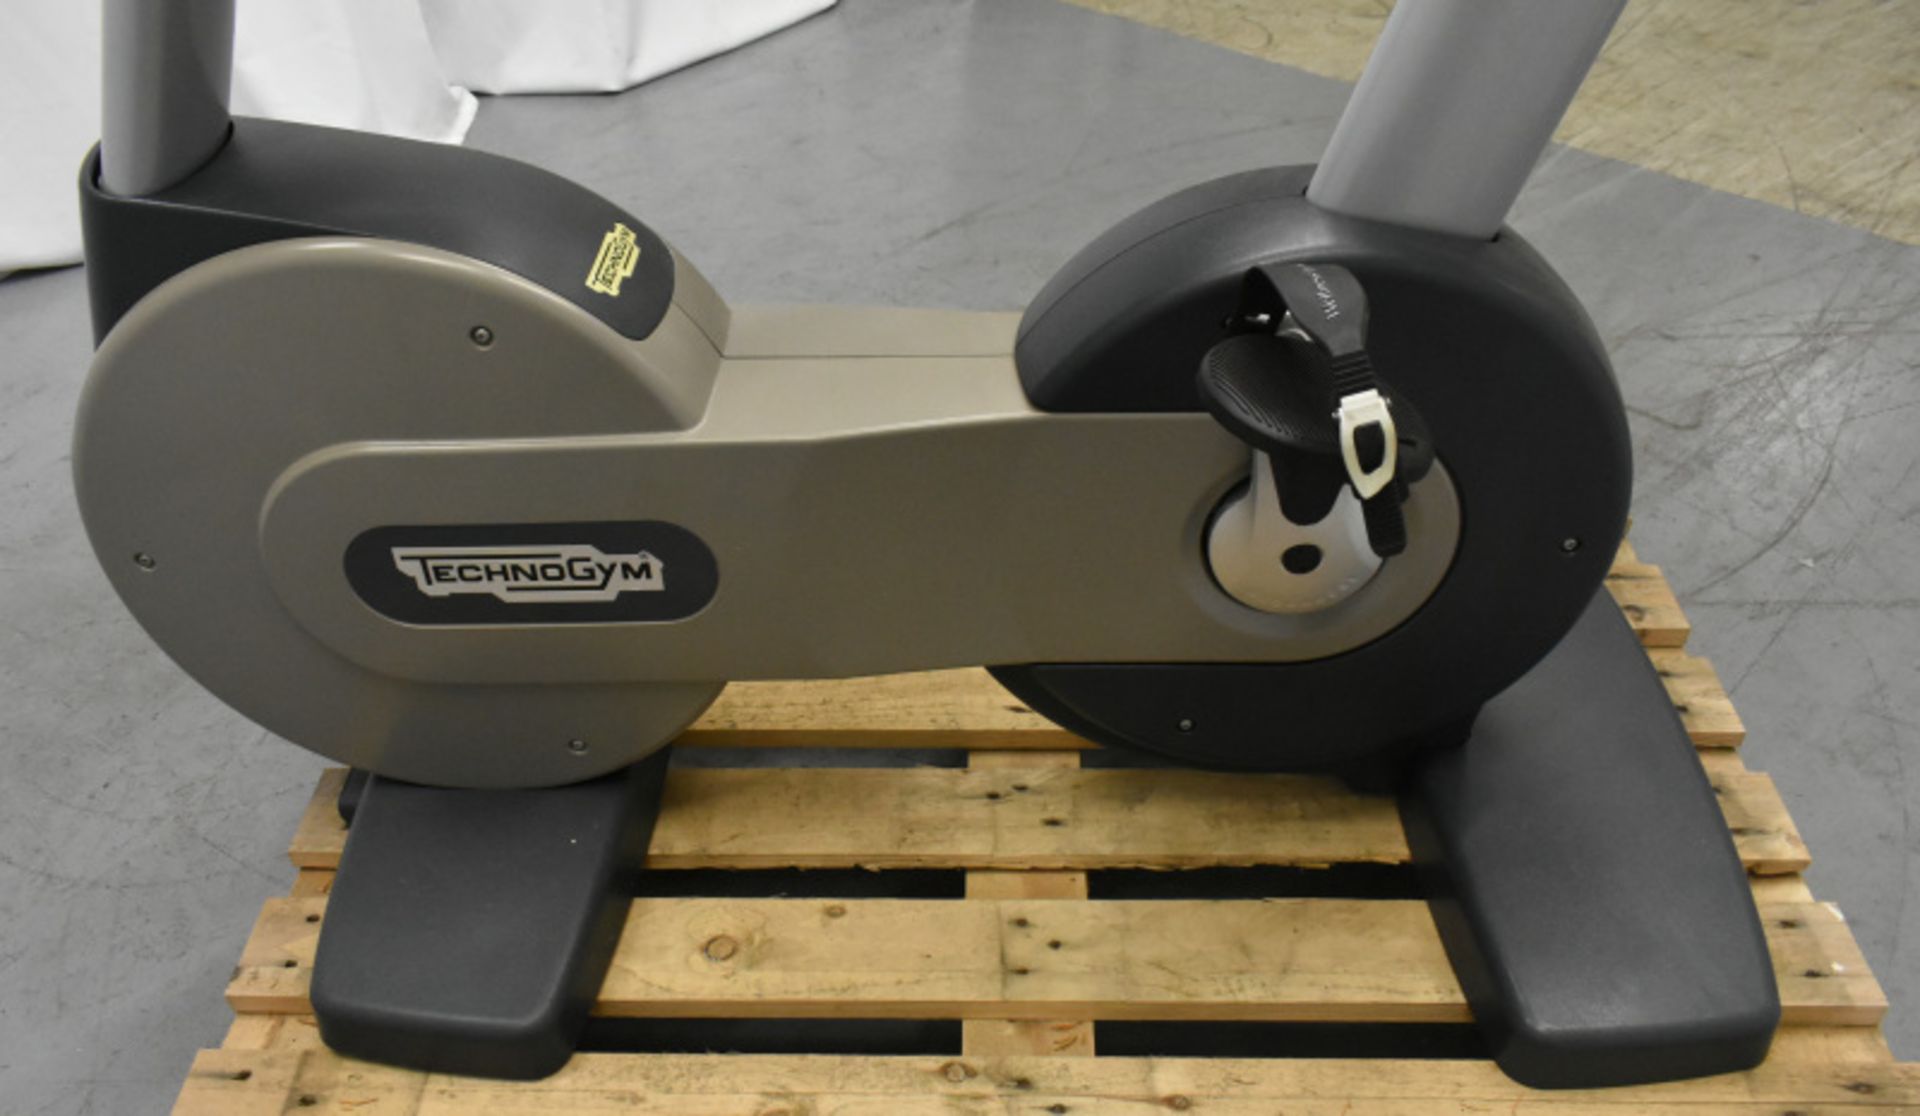 Technogym Exercise Bike - Please check pictures for overall condition - Image 5 of 6